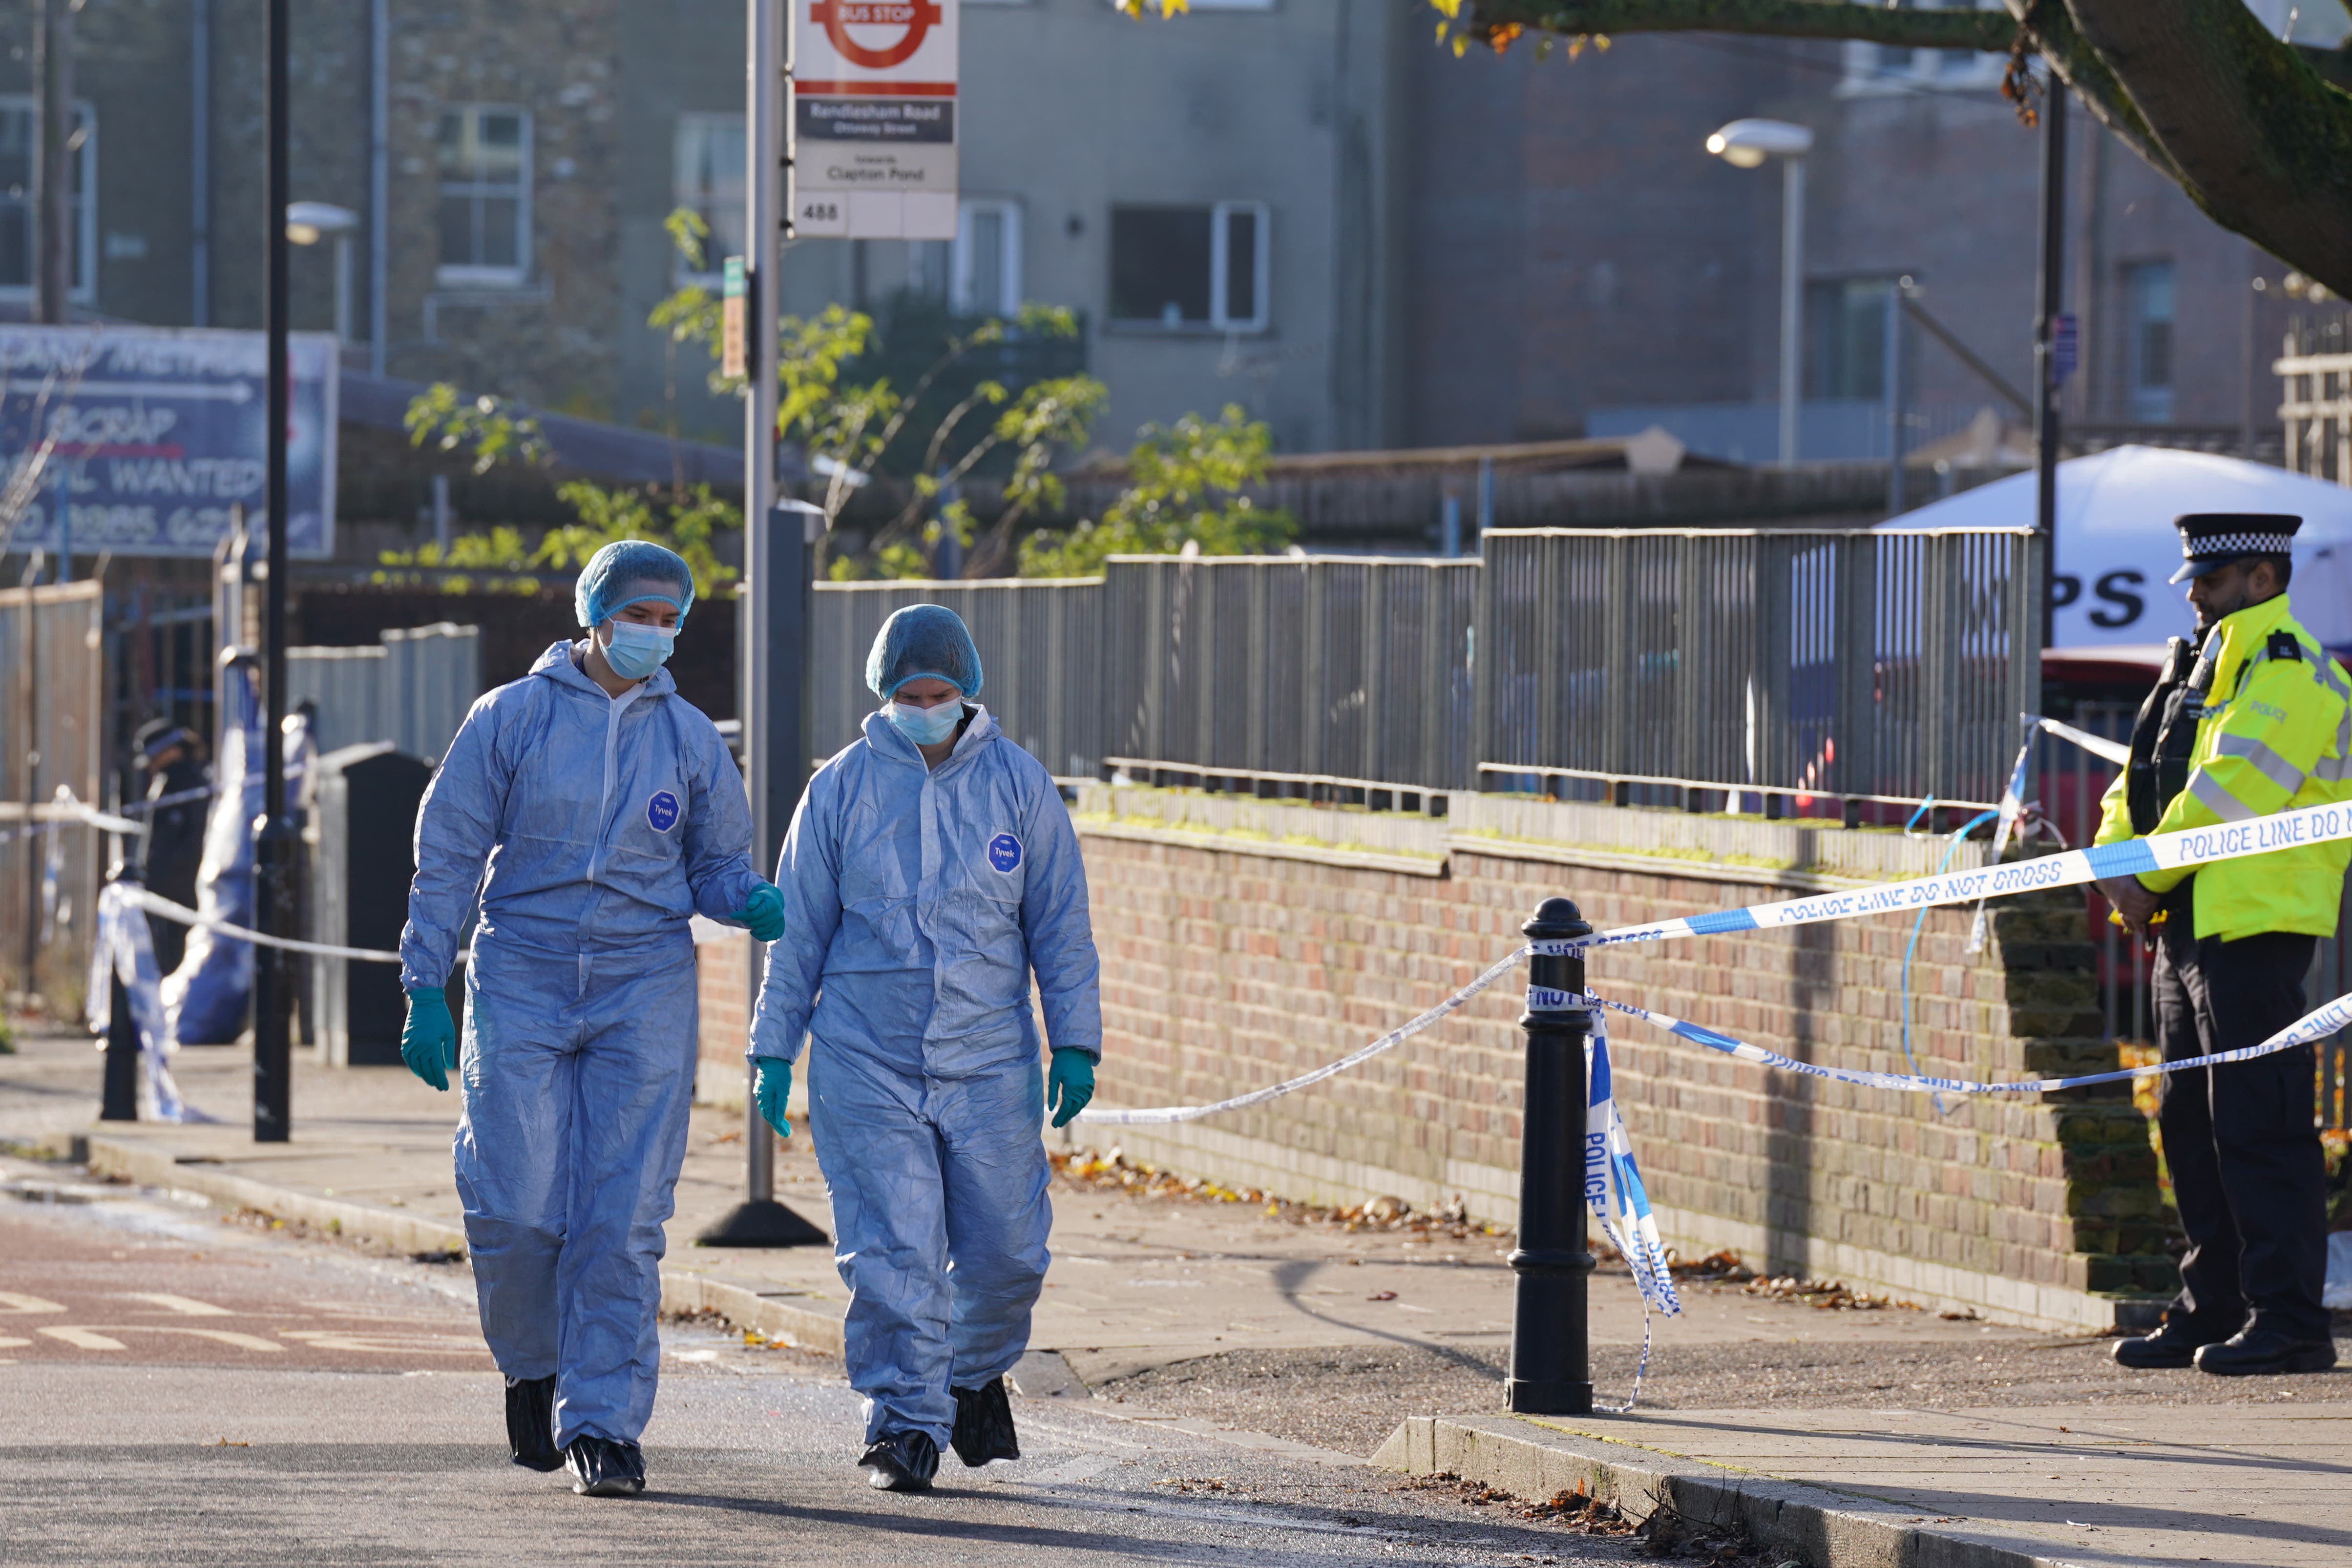 Forensics teams joined Met officers at the scene (Lucy North/PA)